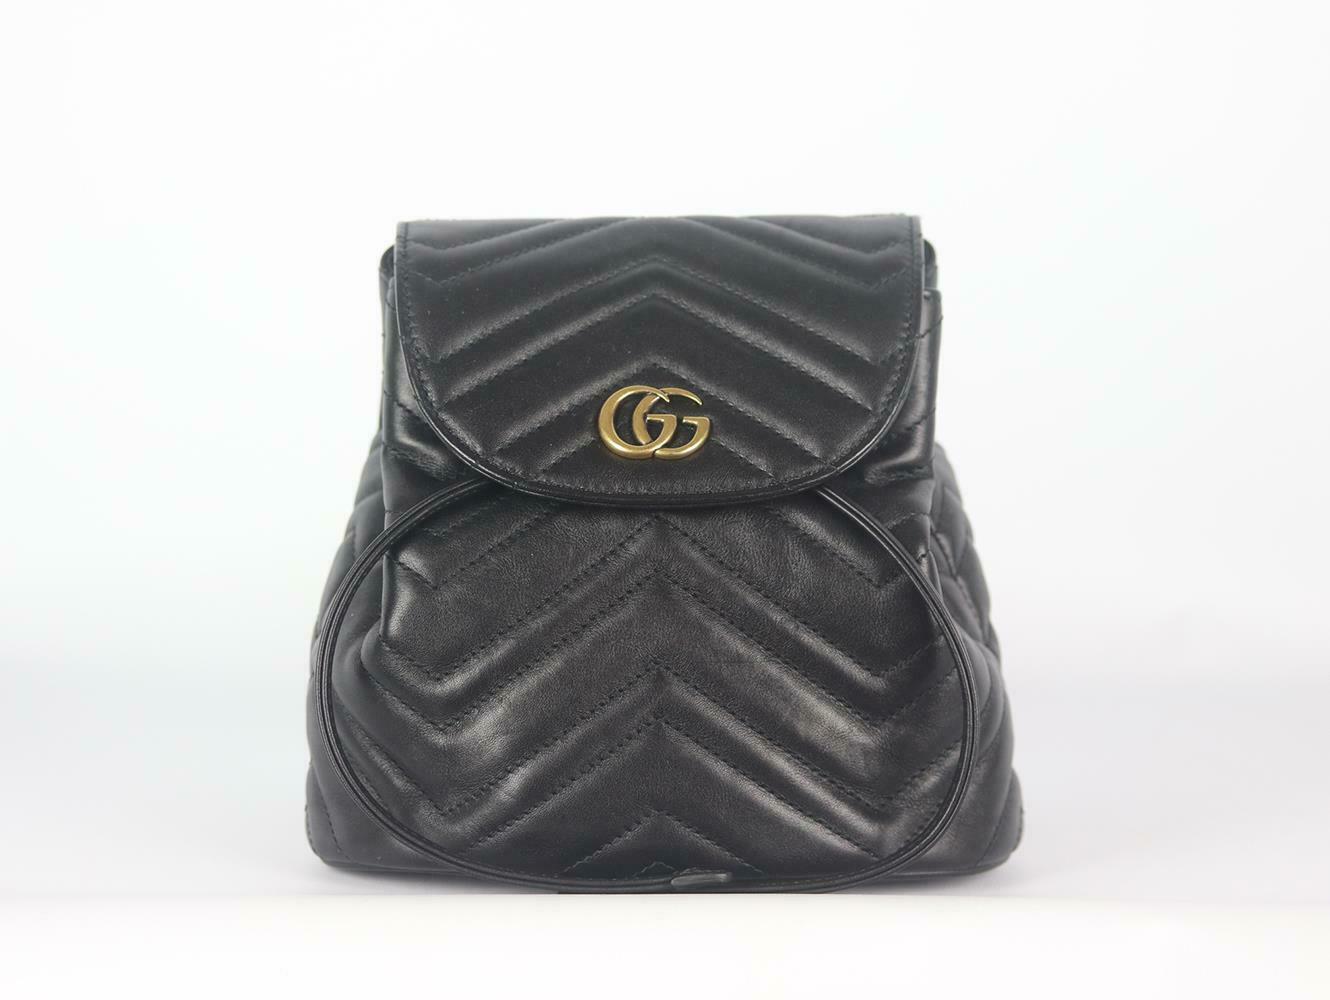 Gucci updates its cult favorite 'GG Marmont' backpack in quilted matelassé leather for the new season, it's decorated with the heritage 'GG' logo and has a spacious interior that offers plenty of room for all of your essentials.
Black leather